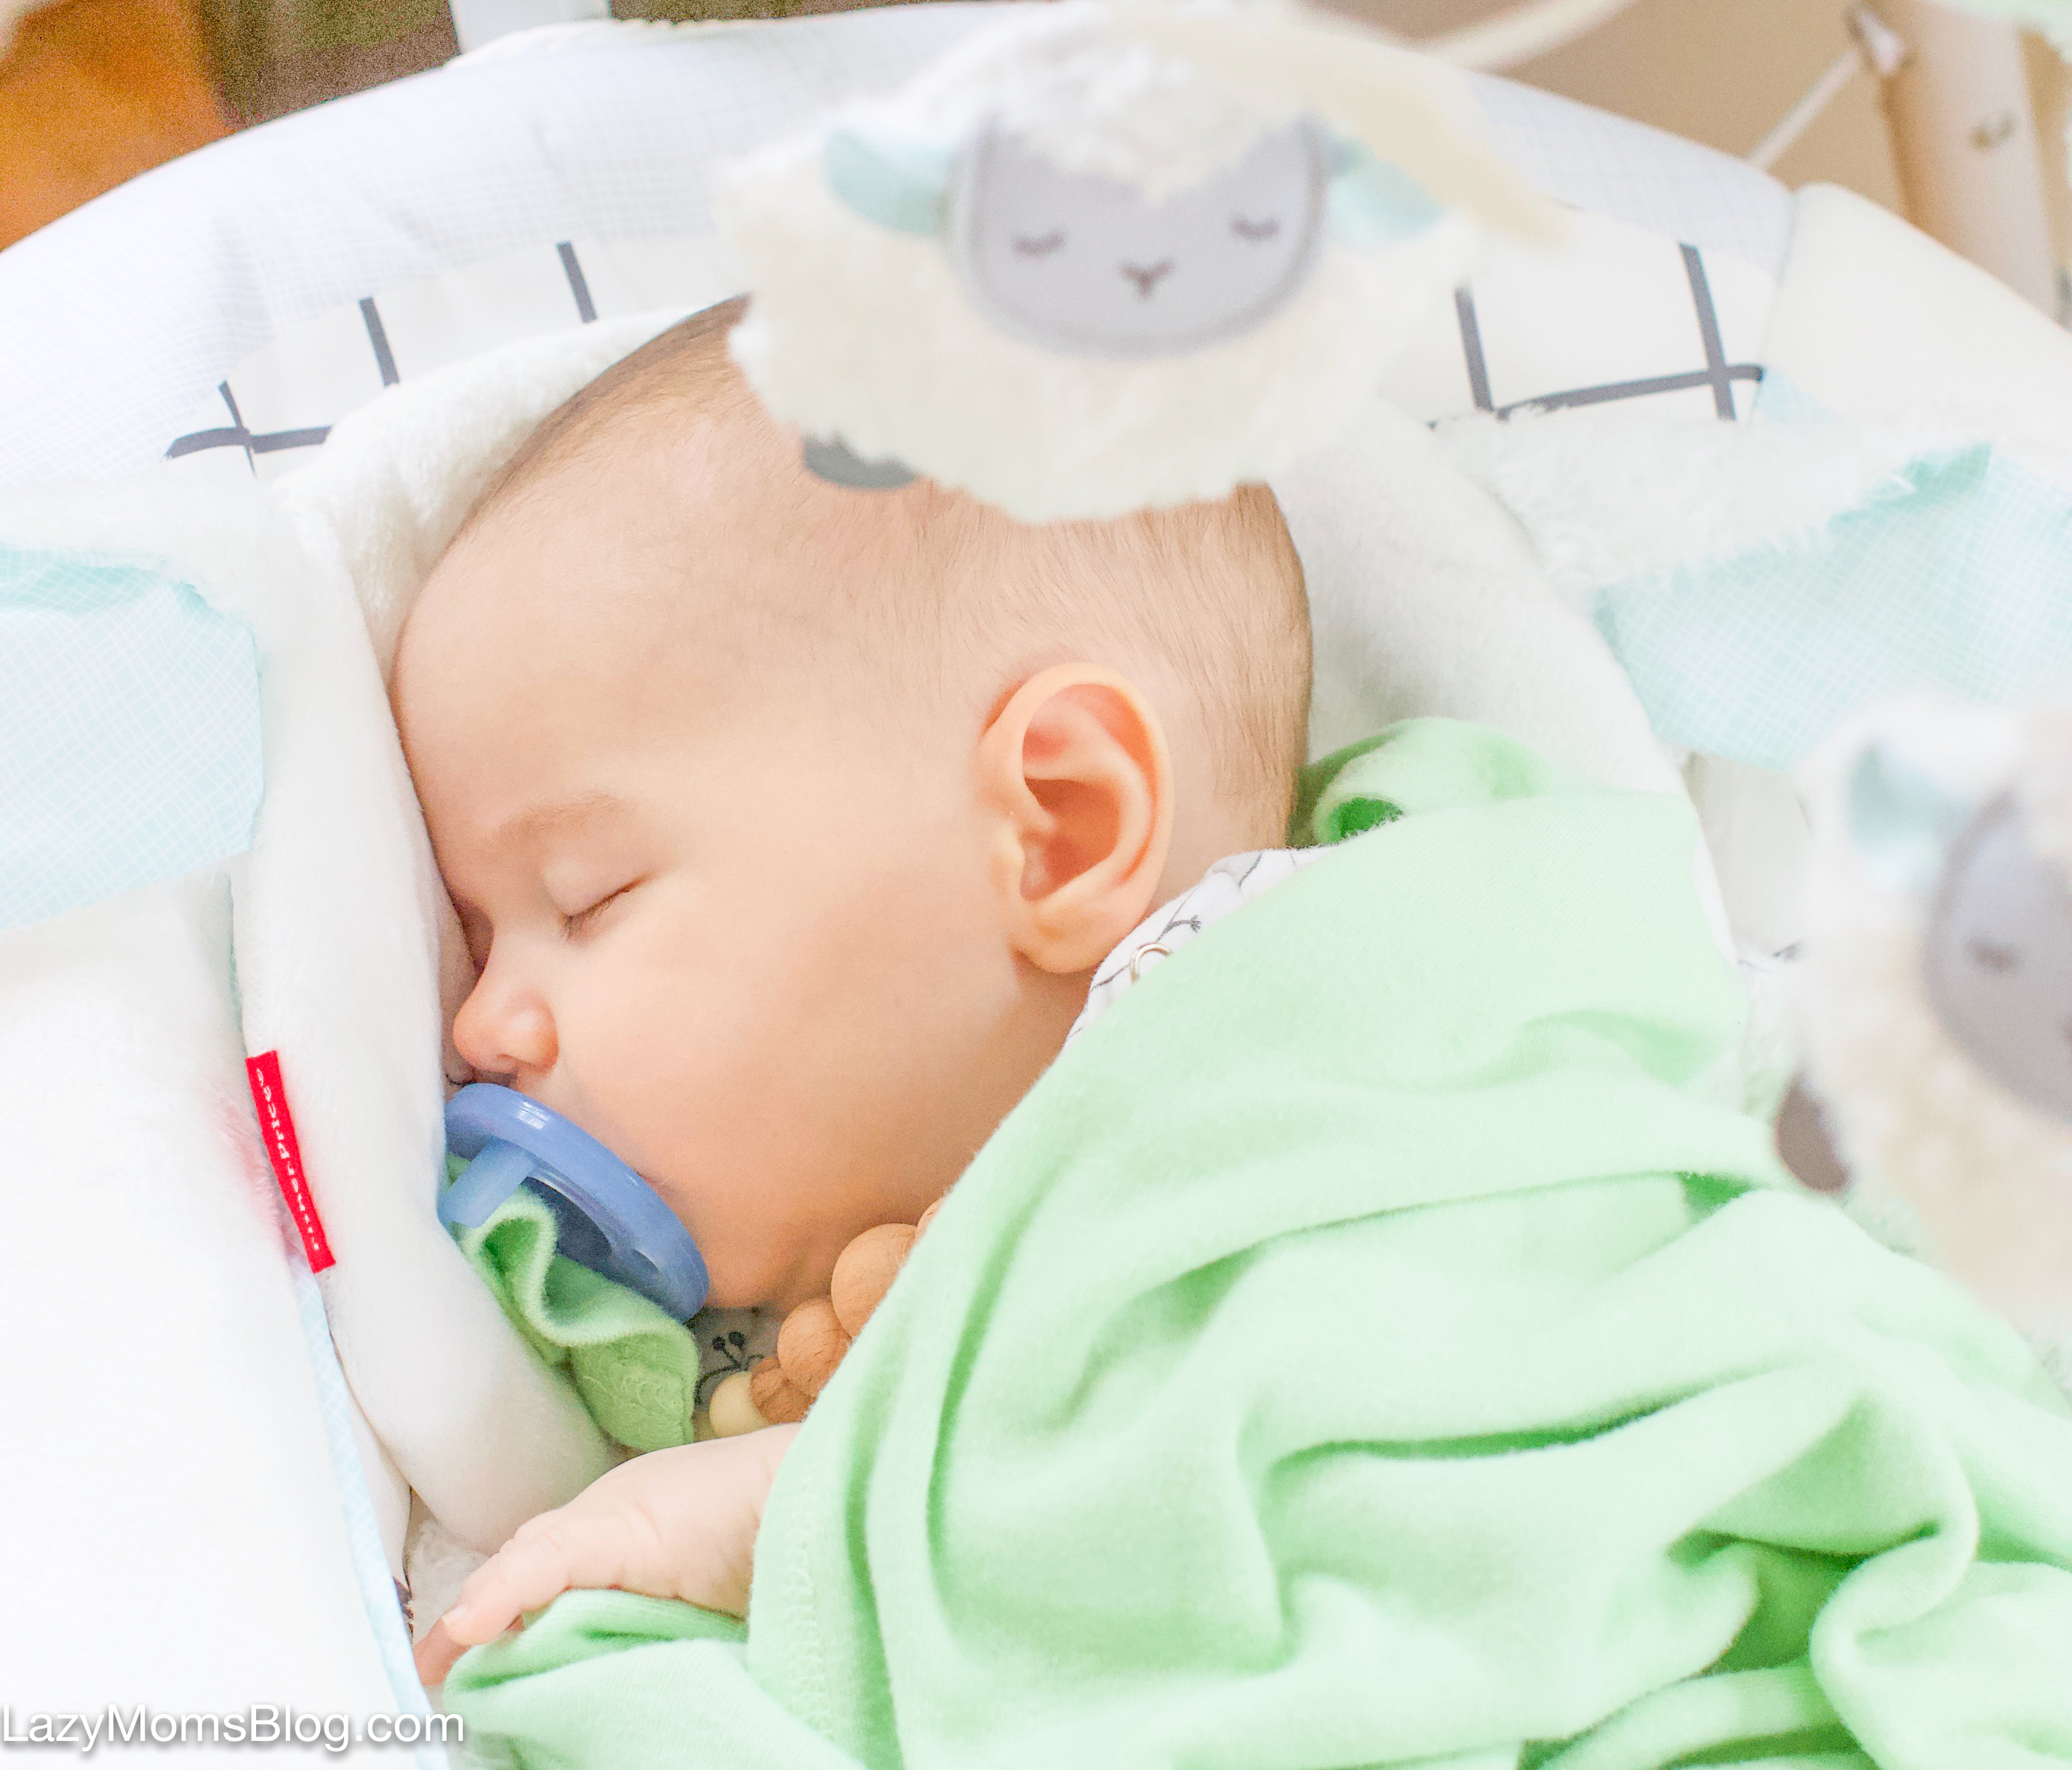 How to help your baby nap well